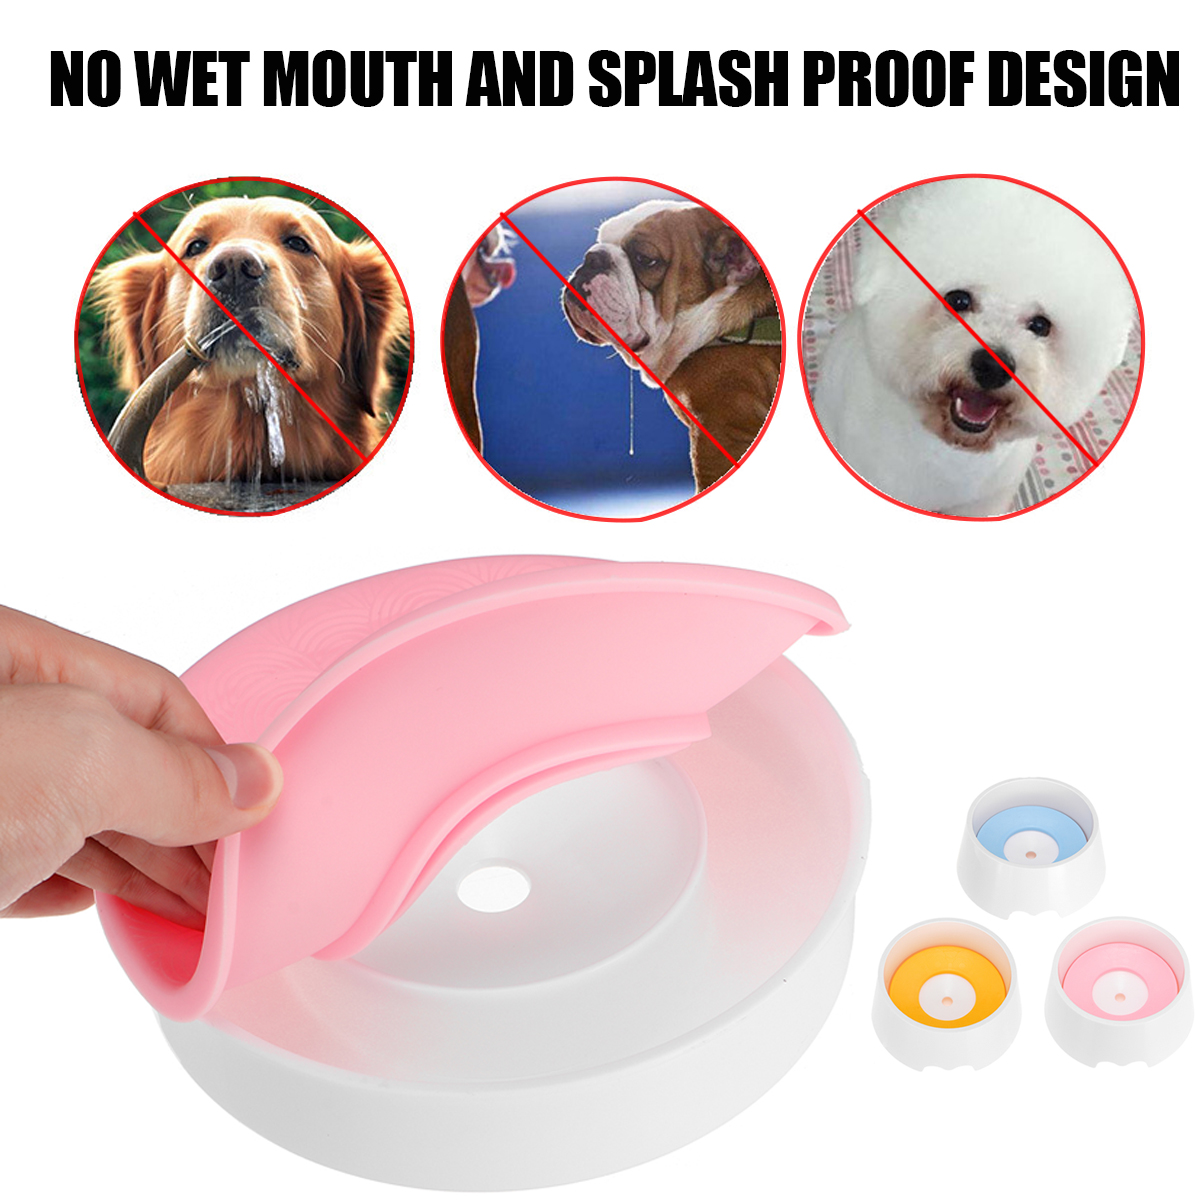 No-Wet-Mouth-and-Splash-Proof-Pet-Feeding-Puppy-Travel-Animal-Water-Bowl-1439667-1